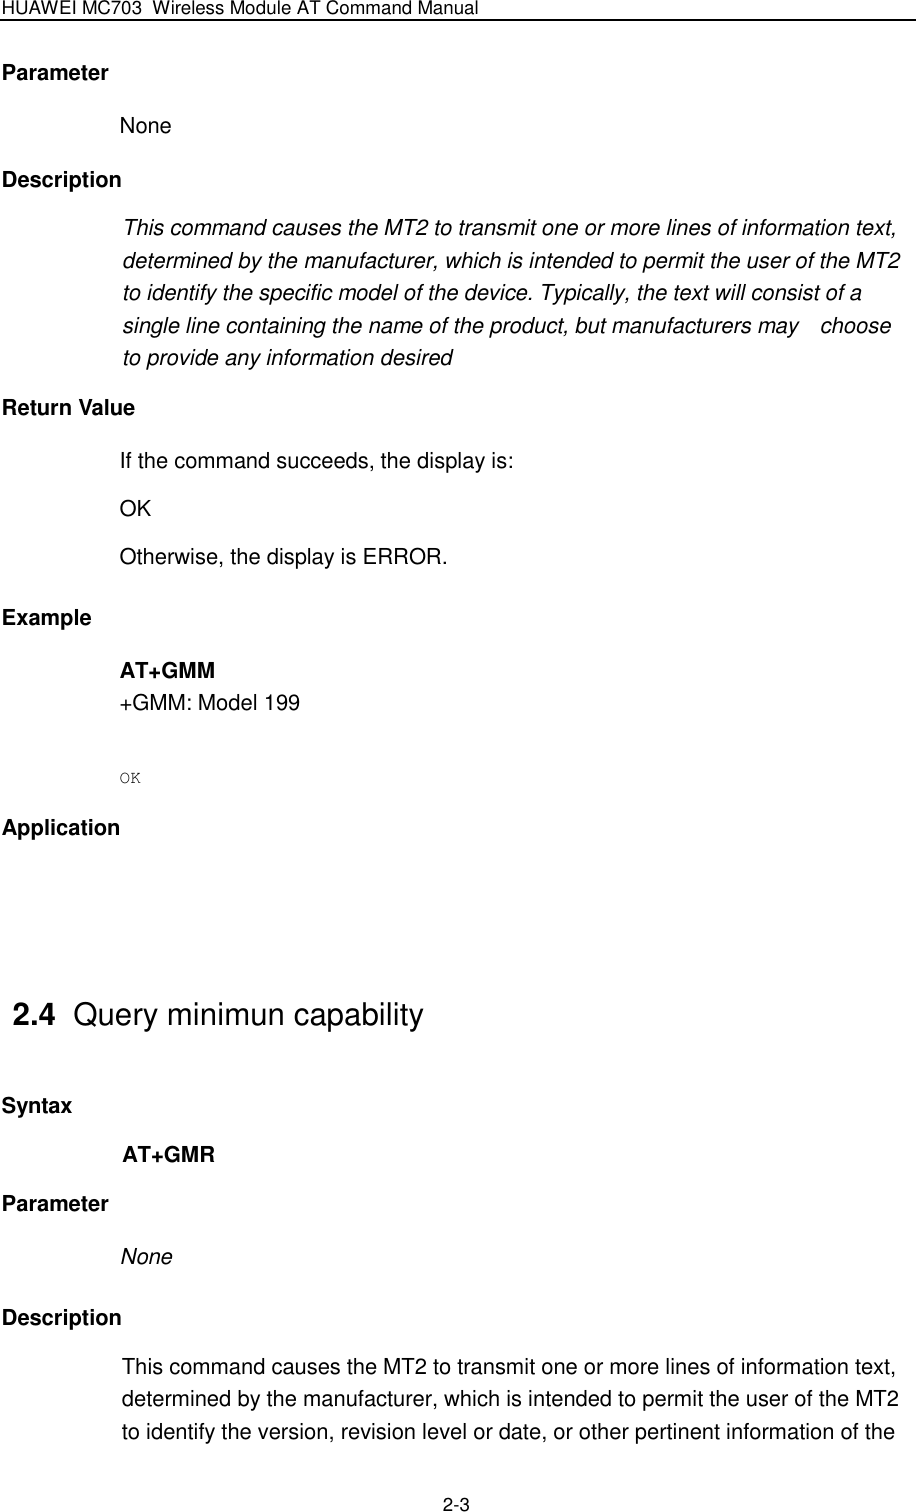 HUAWEI MC703 Wireless Module AT Command Manual   2-3 Parameter None Description This command causes the MT2 to transmit one or more lines of information text, determined by the manufacturer, which is intended to permit the user of the MT2 to identify the specific model of the device. Typically, the text will consist of a single line containing the name of the product, but manufacturers may    choose to provide any information desired Return Value If the command succeeds, the display is: OK   Otherwise, the display is ERROR. Example AT+GMM +GMM: Model 199  OK Application   2.4  Query minimun capability Syntax AT+GMR Parameter None Description This command causes the MT2 to transmit one or more lines of information text, determined by the manufacturer, which is intended to permit the user of the MT2 to identify the version, revision level or date, or other pertinent information of the 